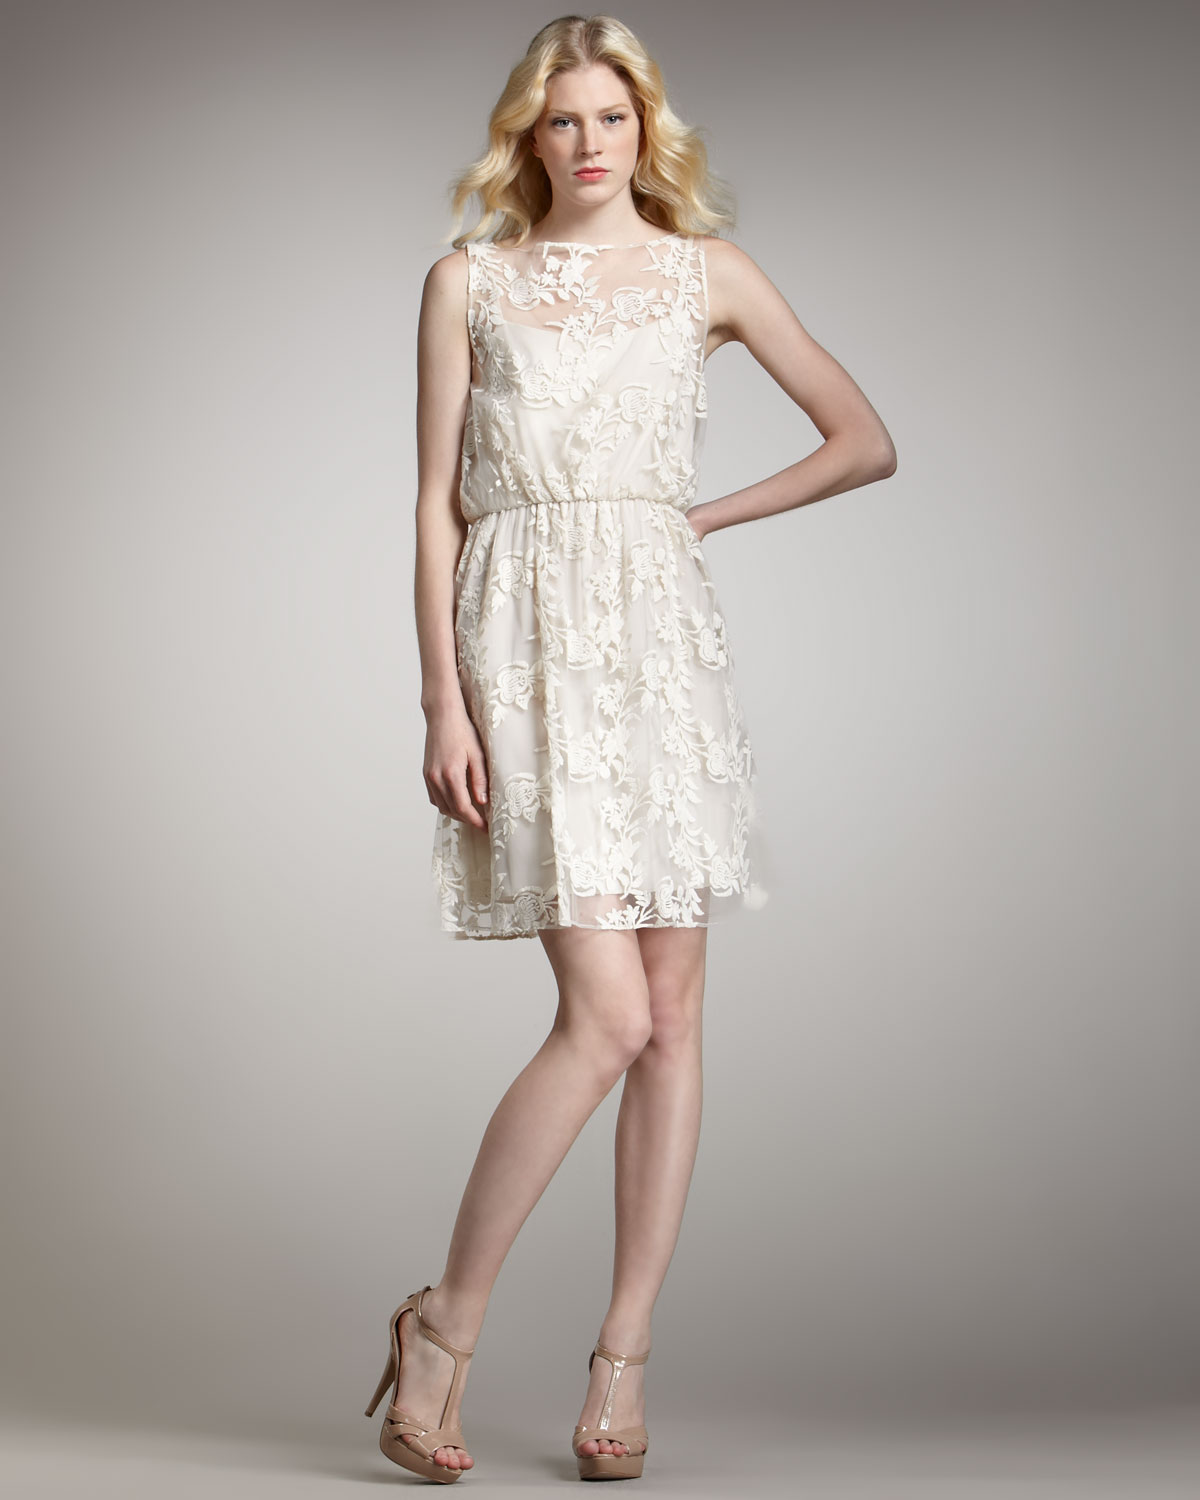 Lyst - Alice + Olivia Darcy Lace-overlay Dress in White